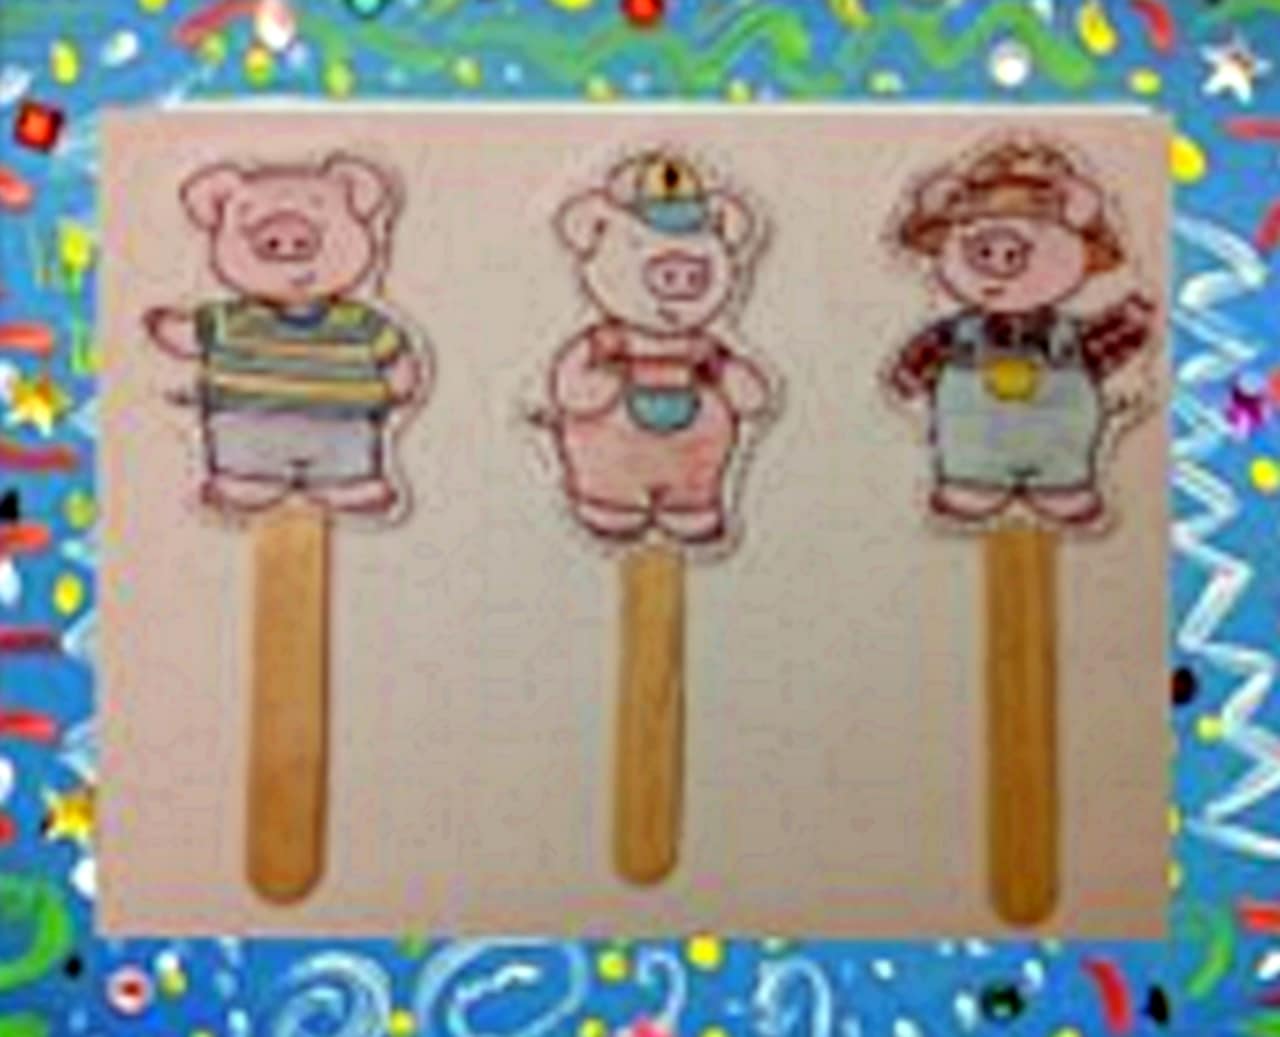 Children are invited to make their own puppets at a Monroe library event.